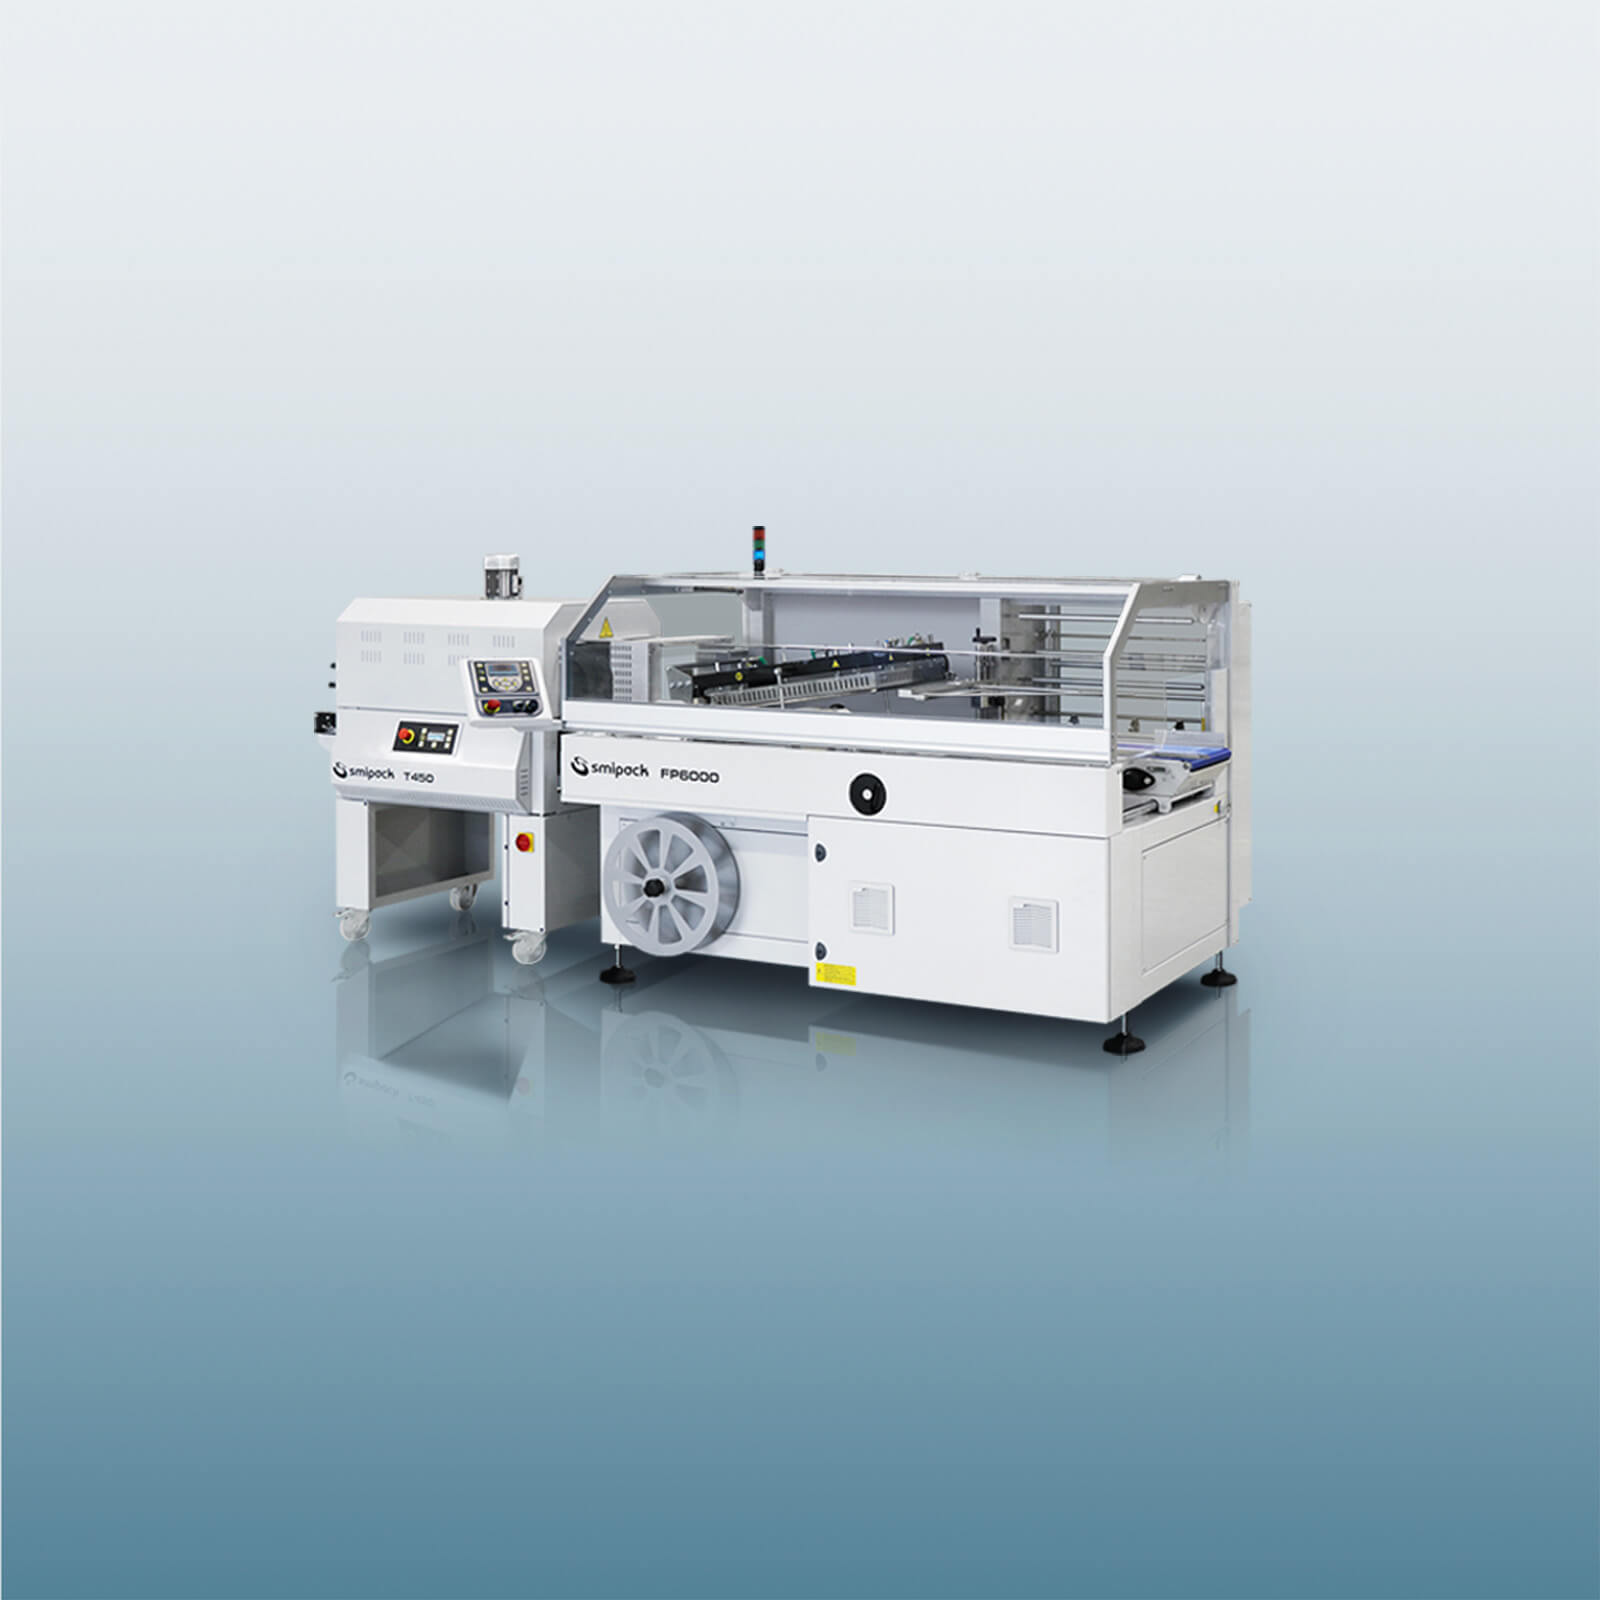 2 X Smipack FP6000 Shrink Wrappers